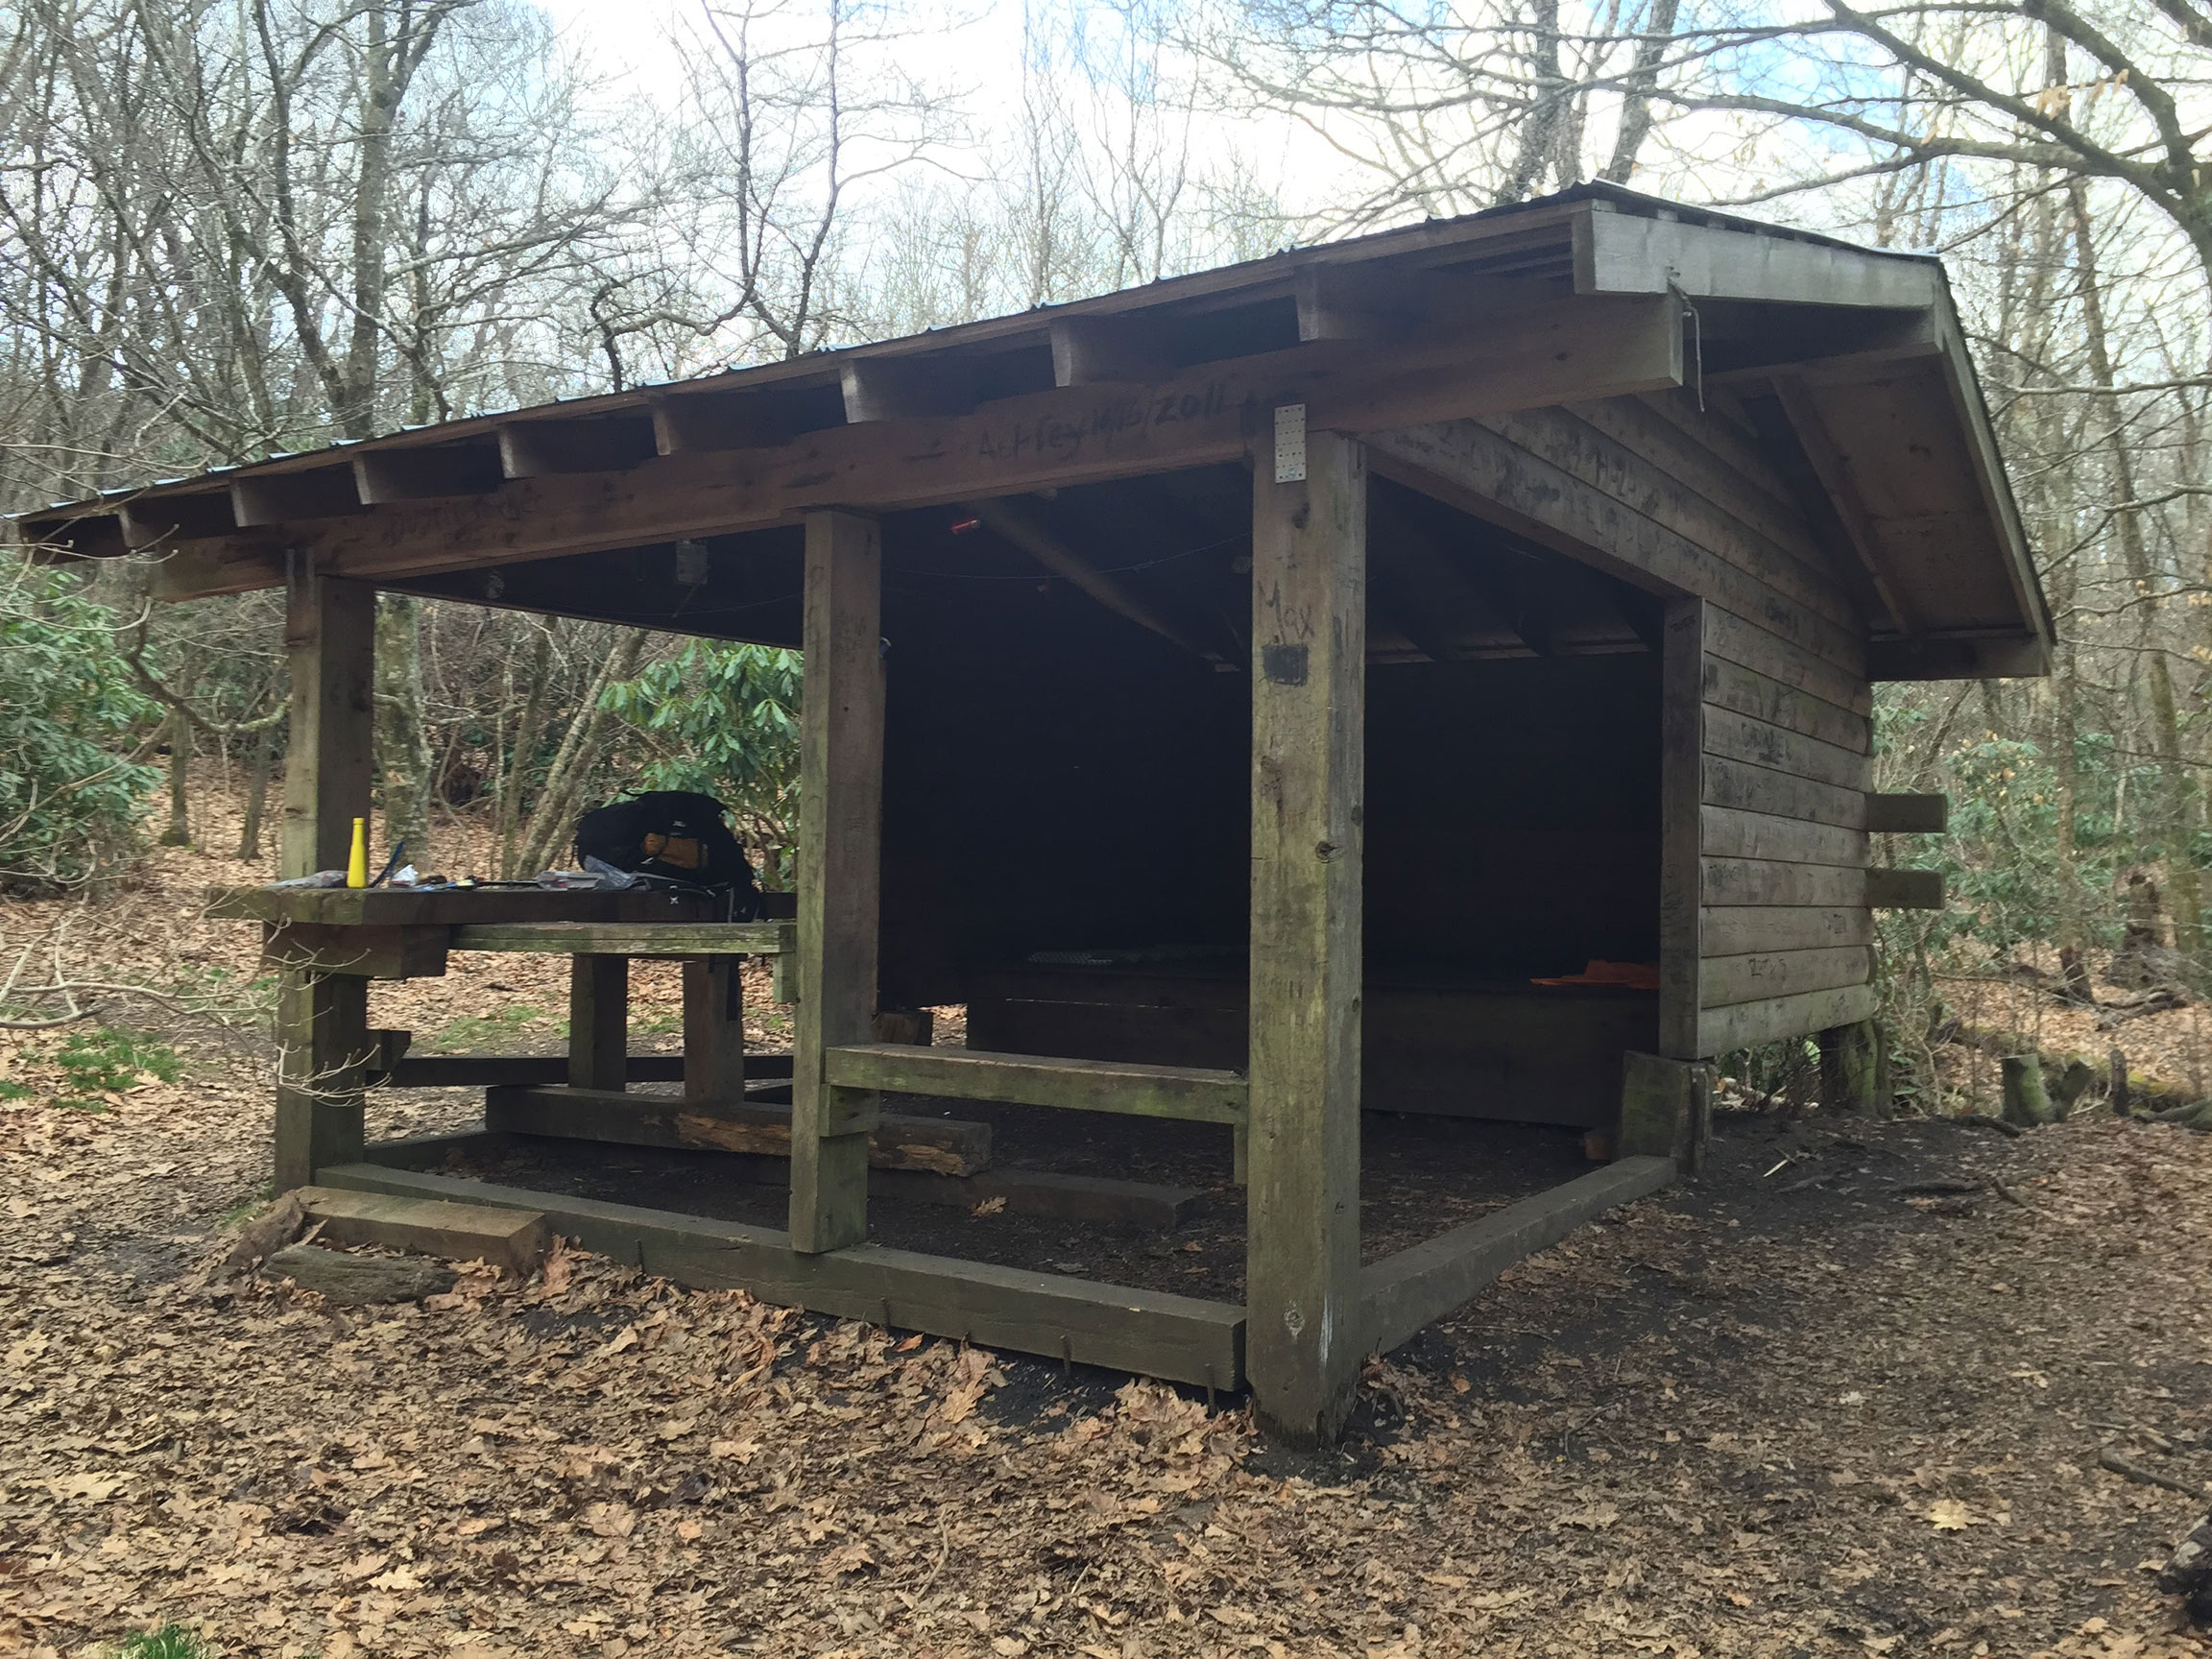 A shelter on The Appalachian Trail